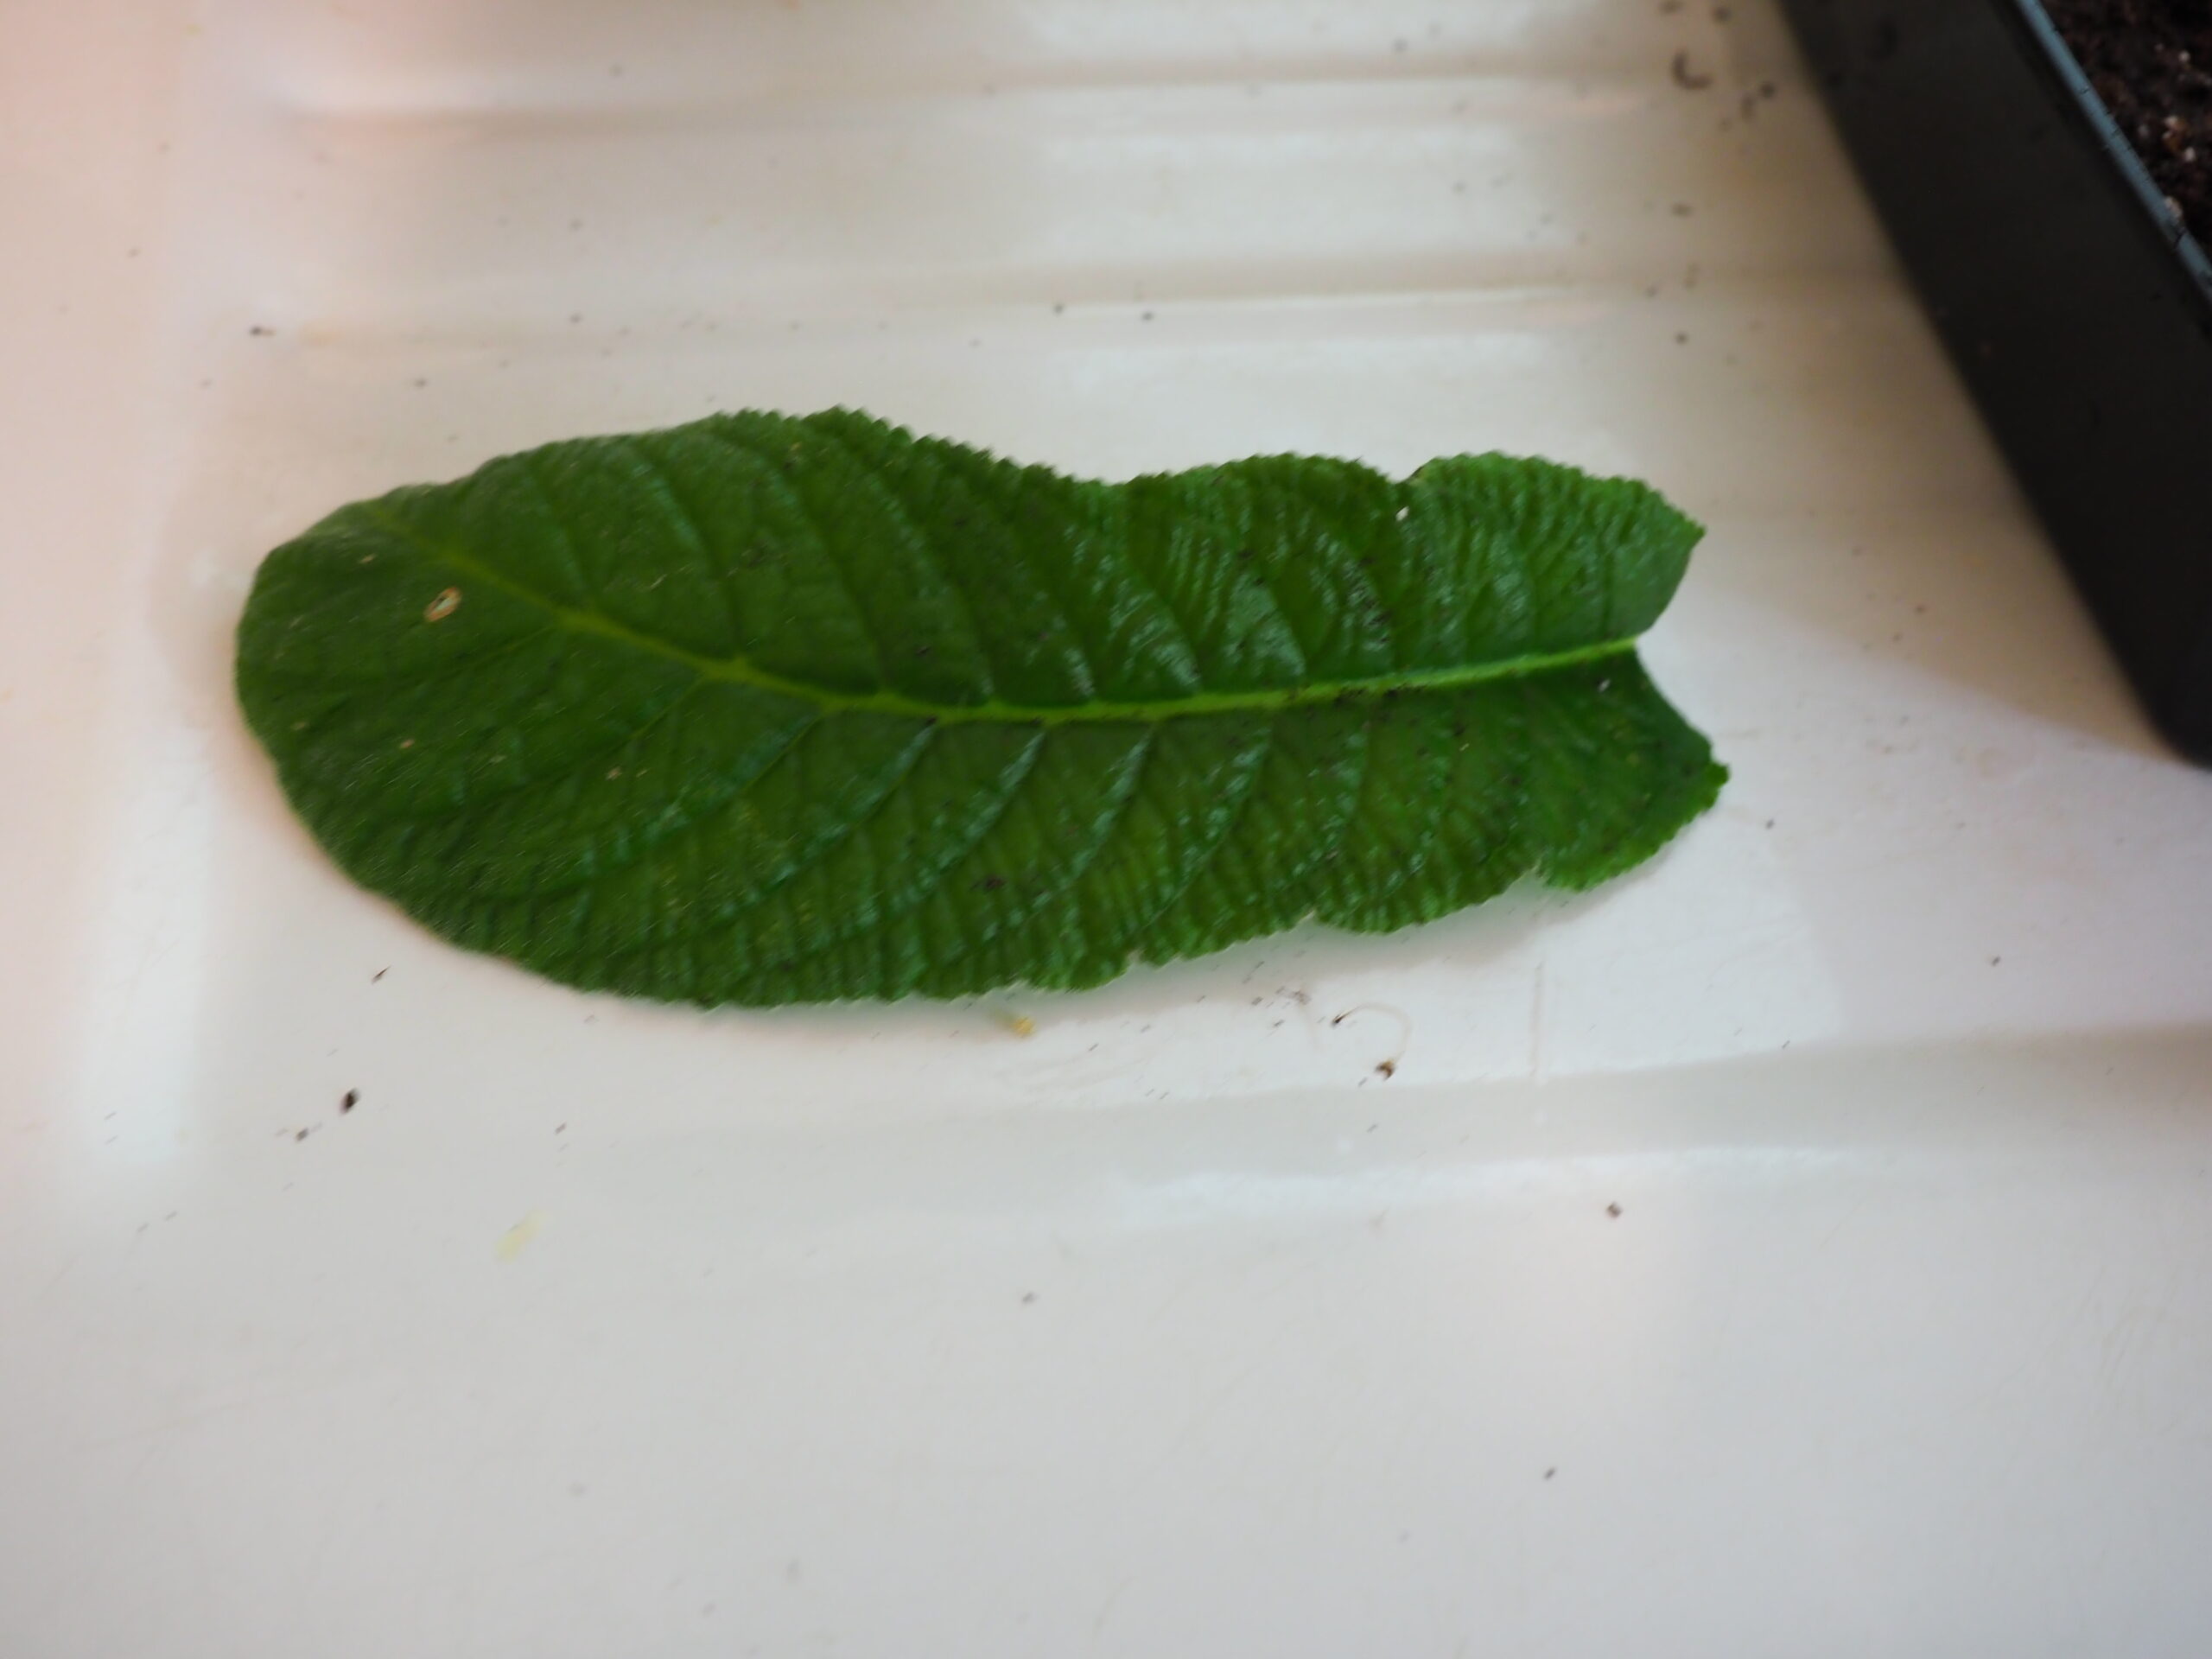 With a leaf removed from the parent plant, the leaf is now ready to be sliced into 1-inch sections with a single-edge razorblade. Sections must be vertical from top to bottom with the midrib in tact.  ANDREW MESSINGER